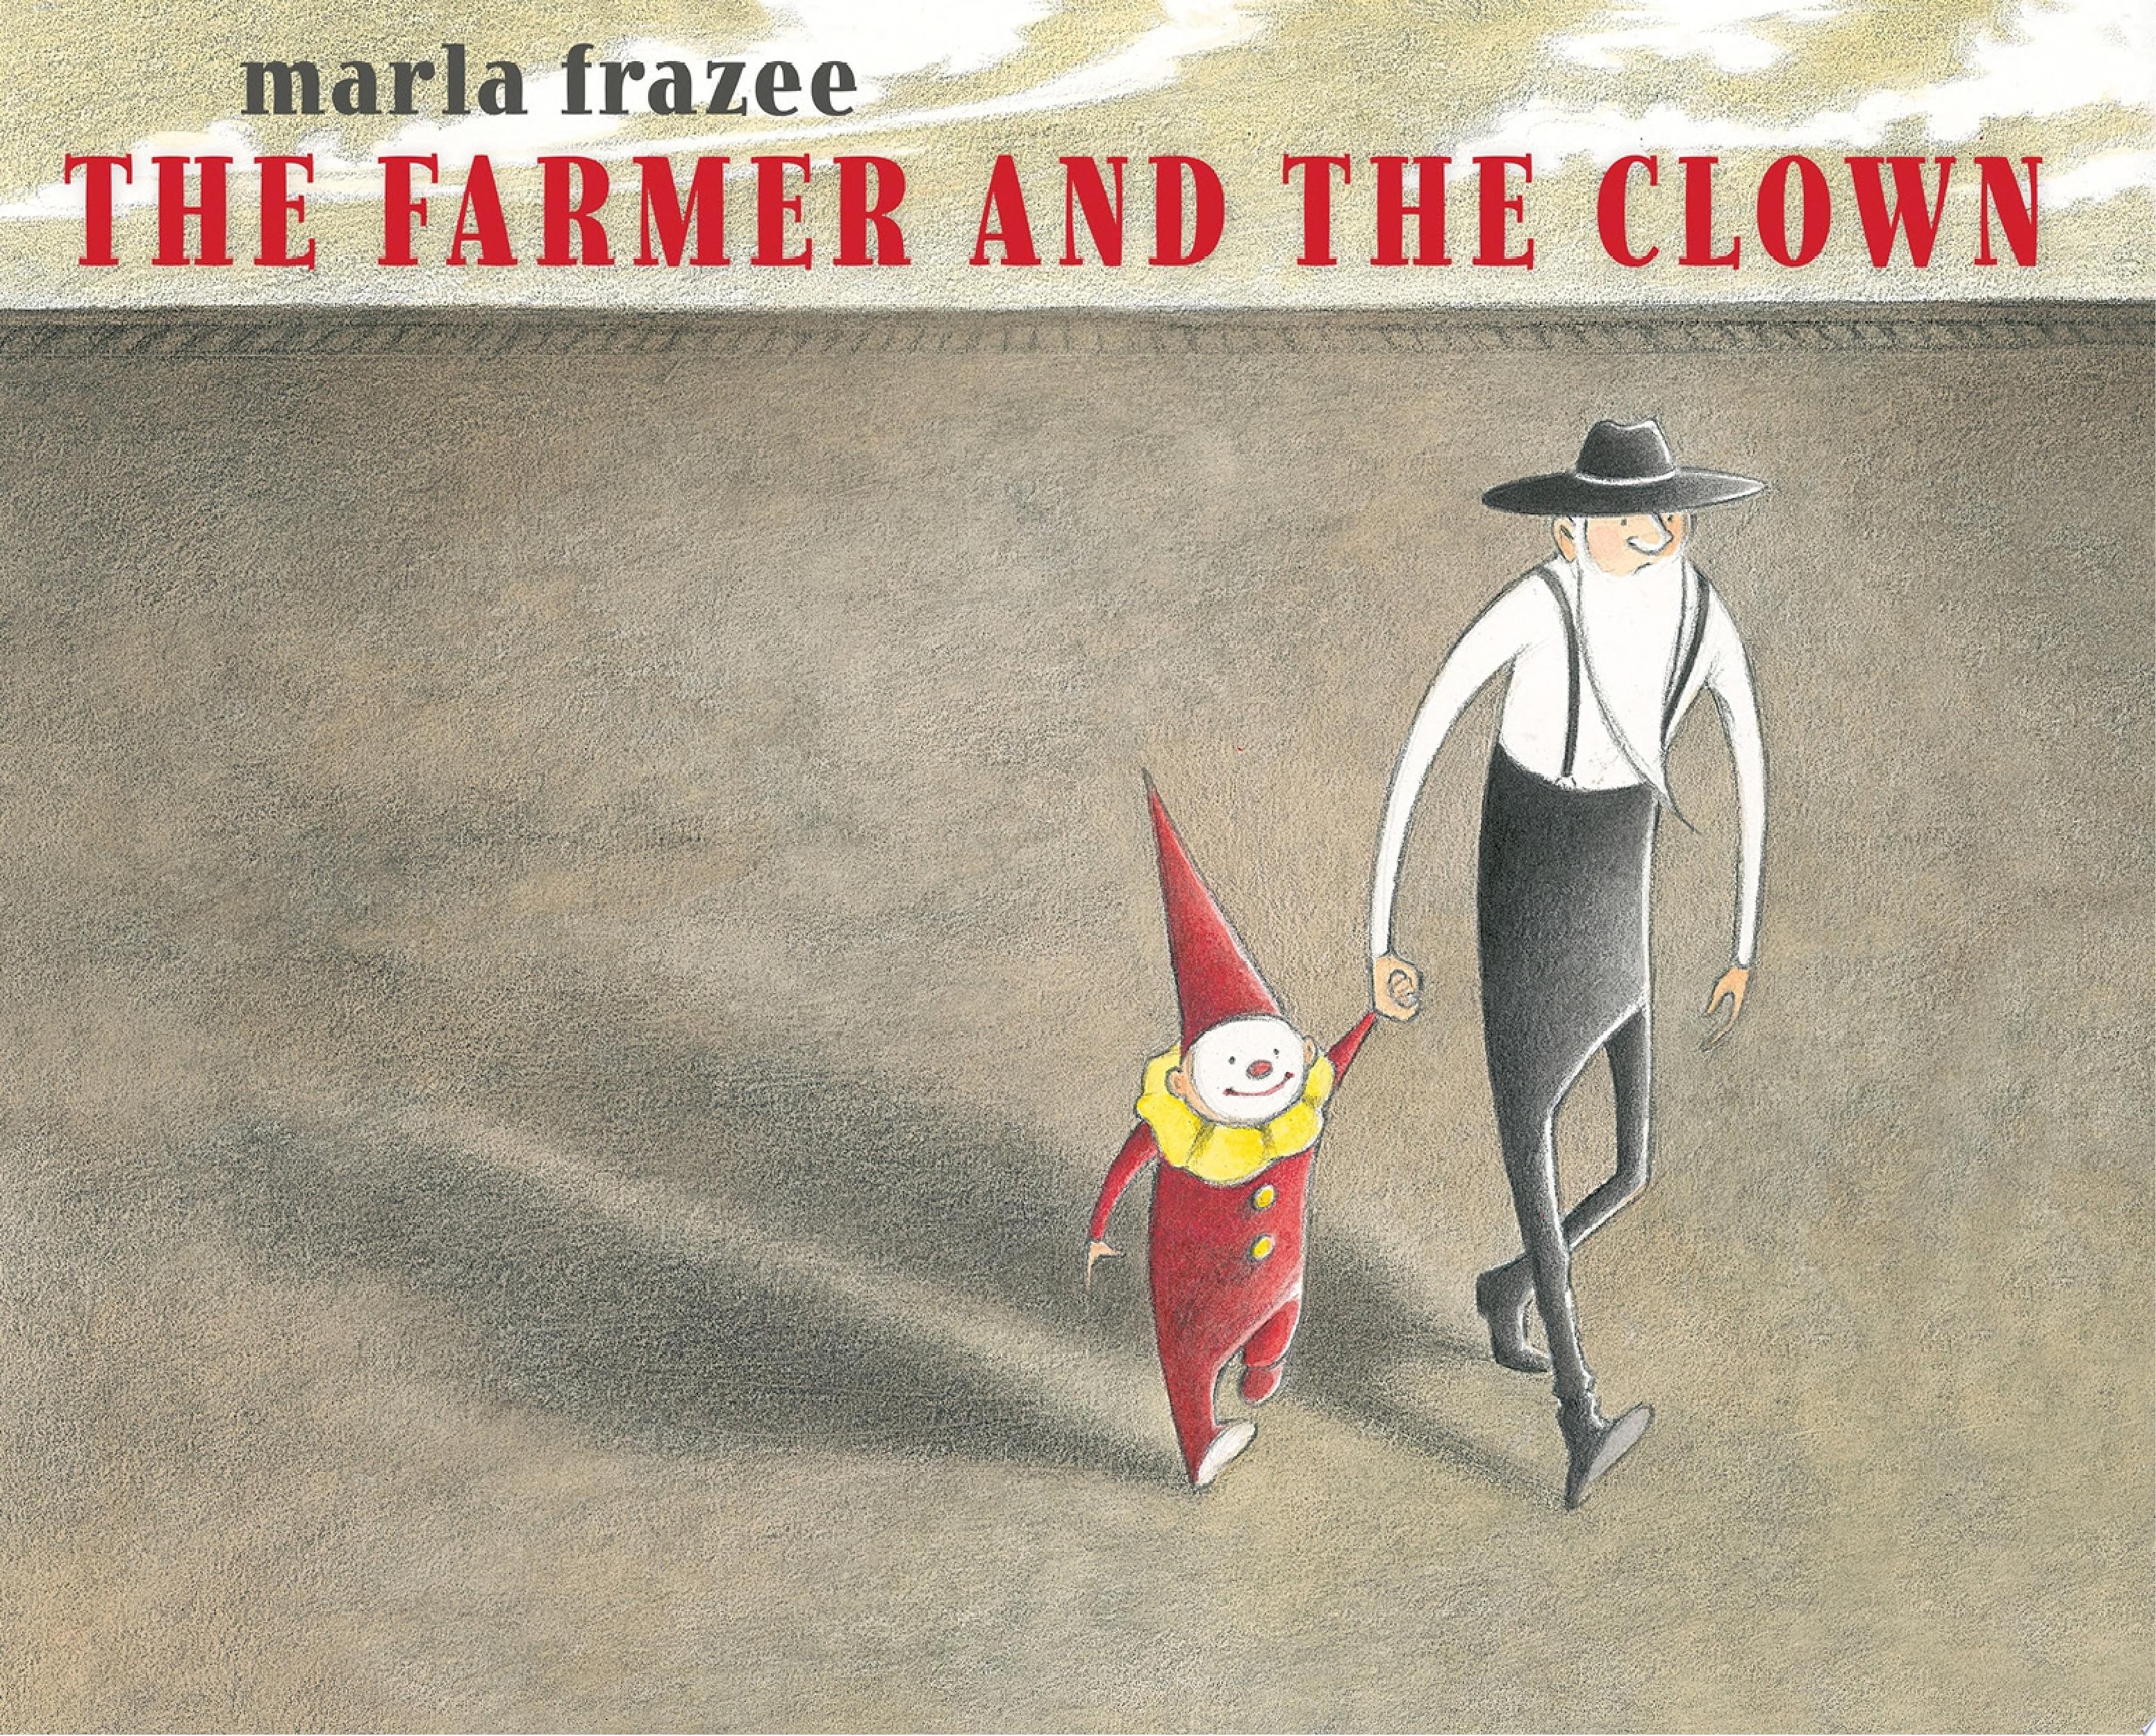 Image for "The Farmer and the Clown"